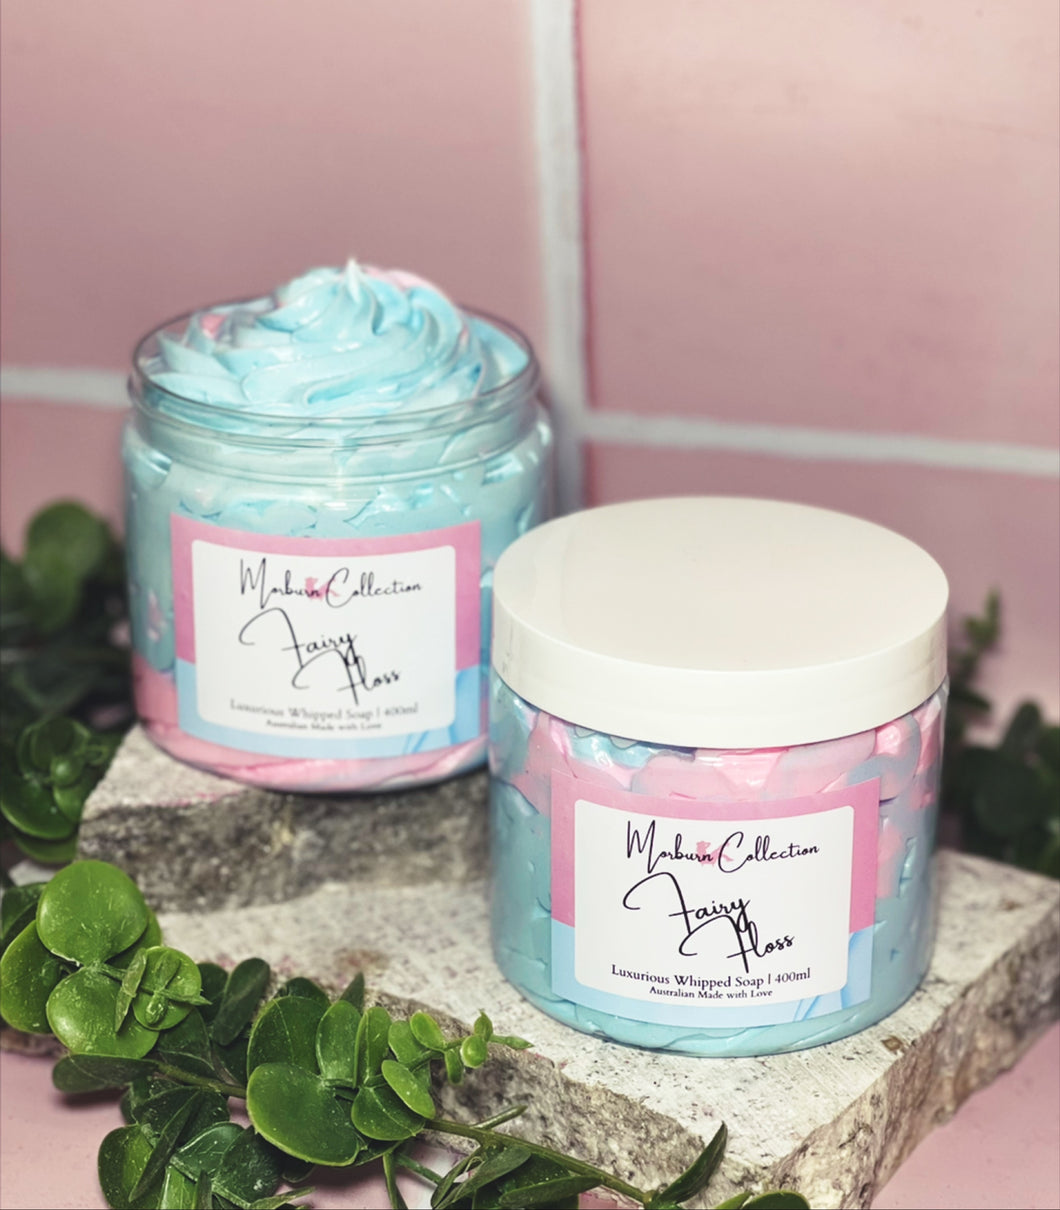 Fairy Floss Whipped Soap